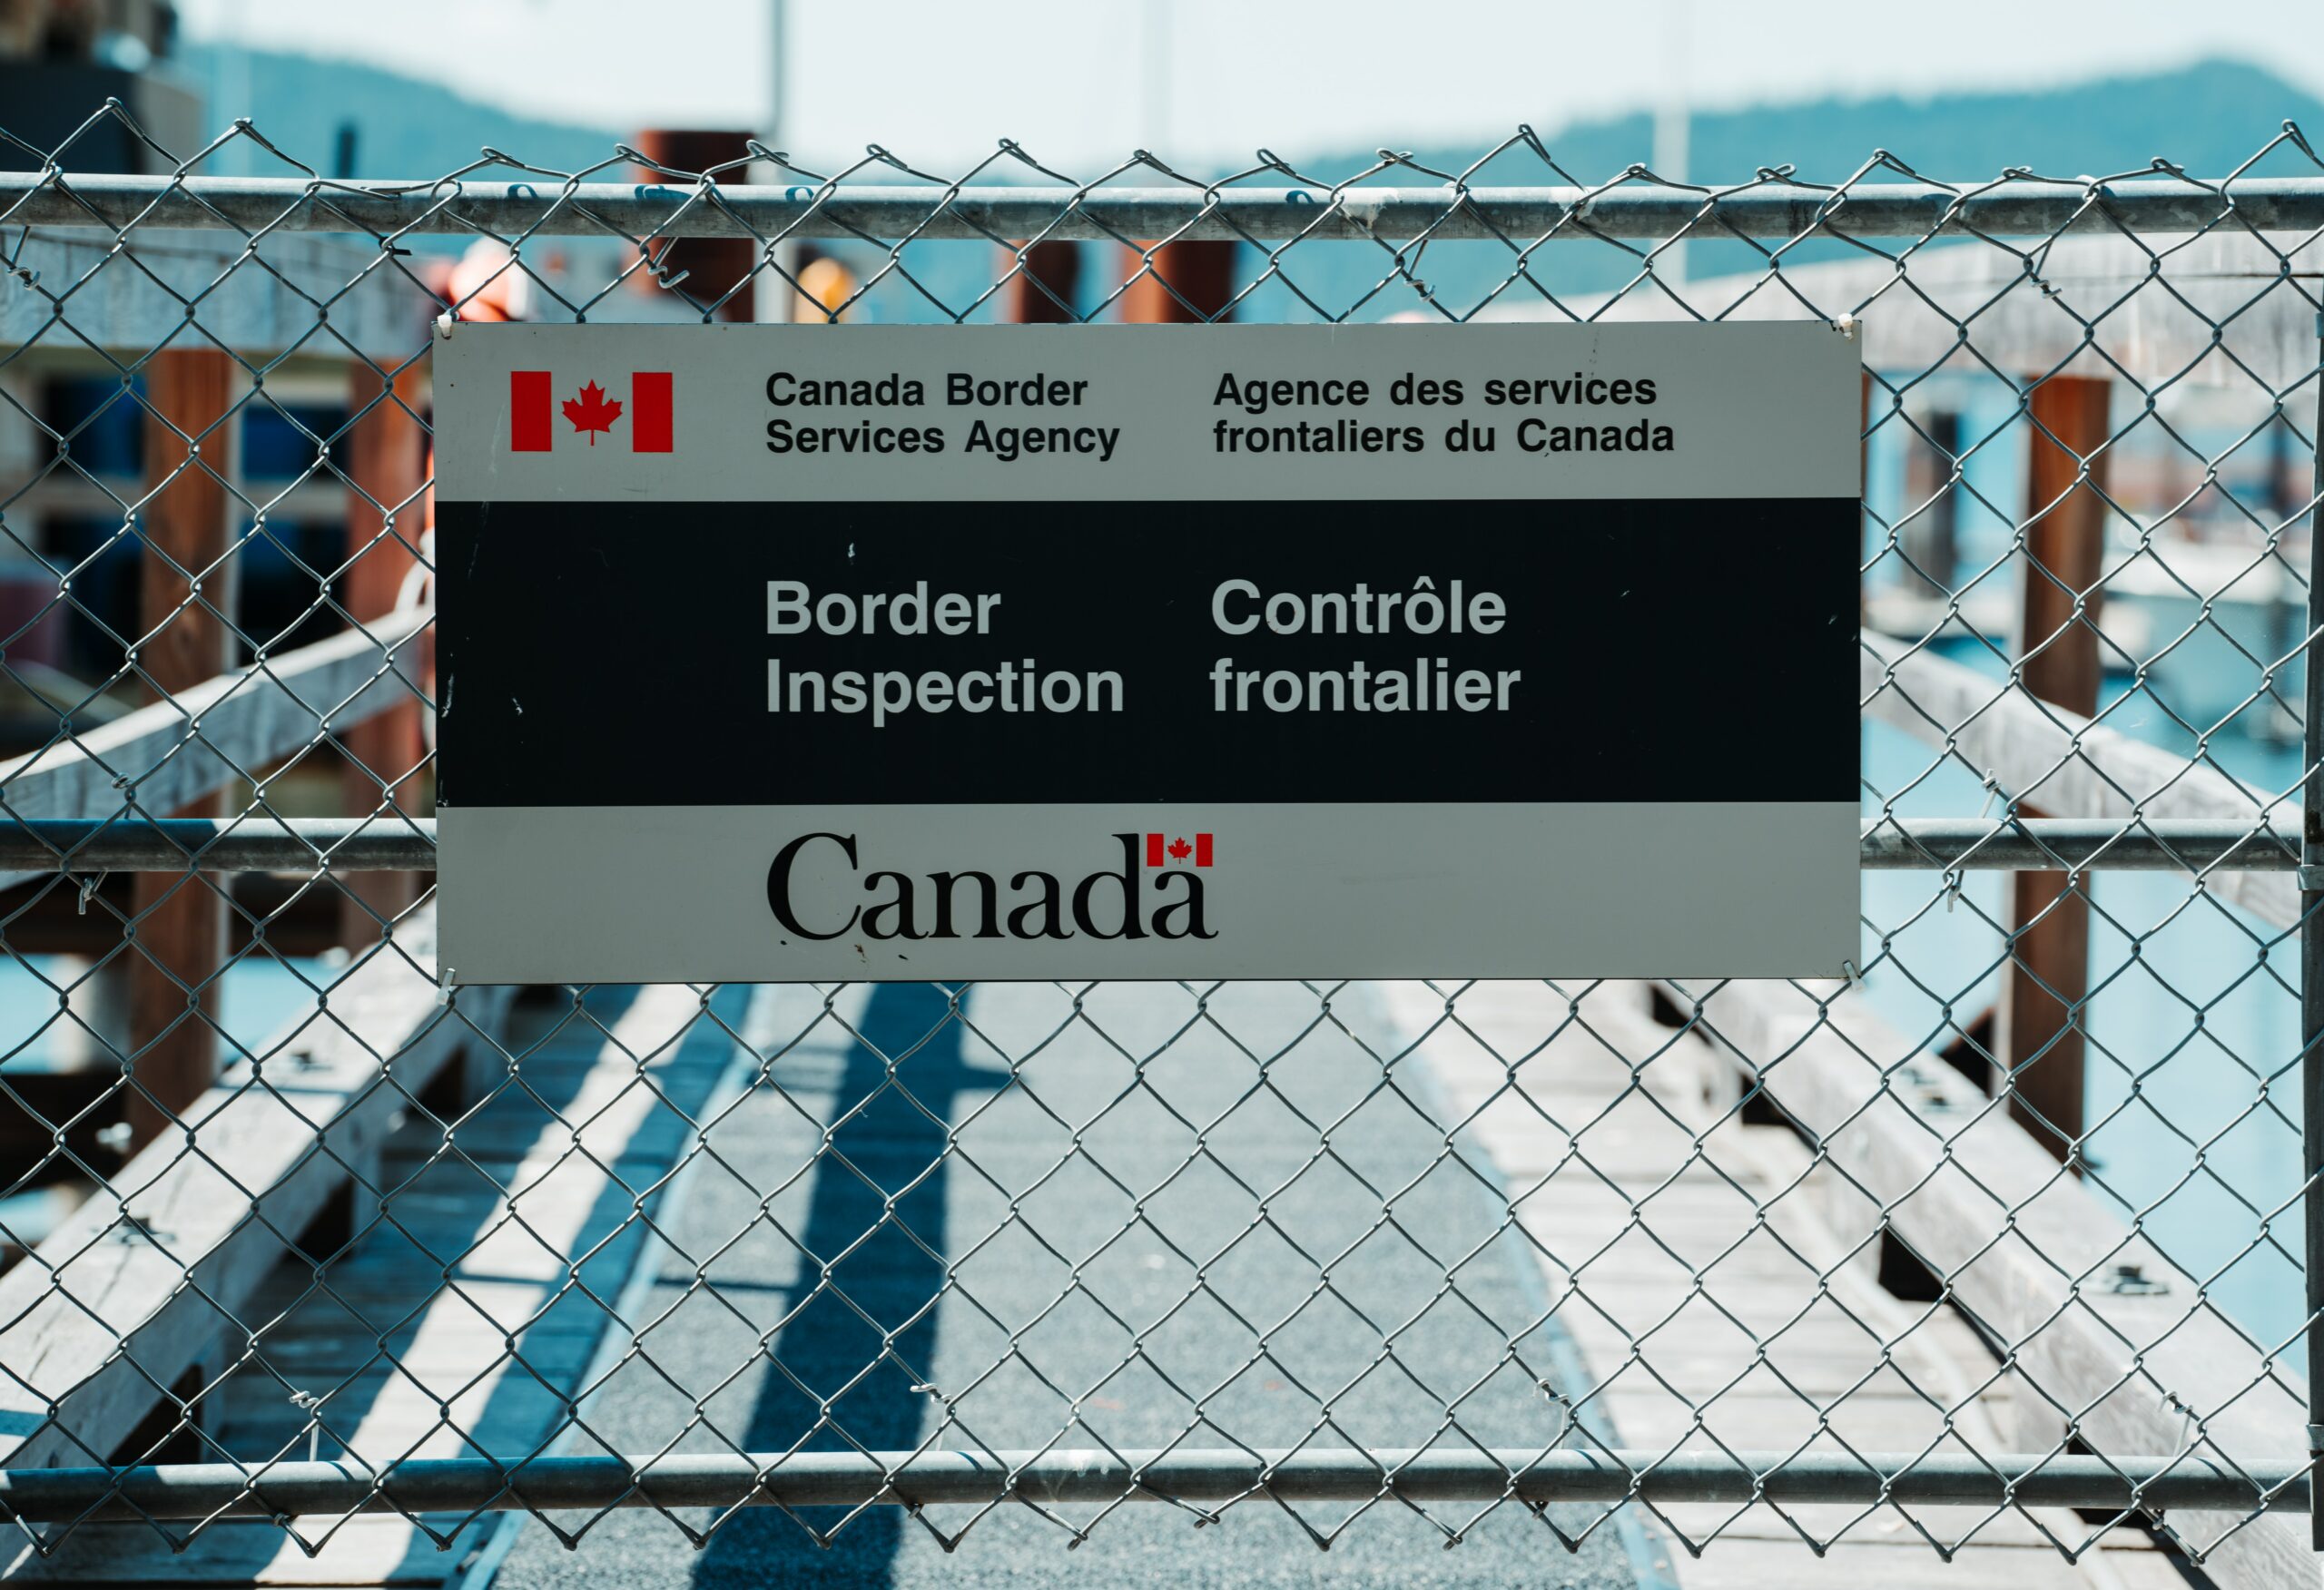 This is a photo of the Canadian border. Specifically, a sign on a metal fence reads, “Canadian Border Inspection.”